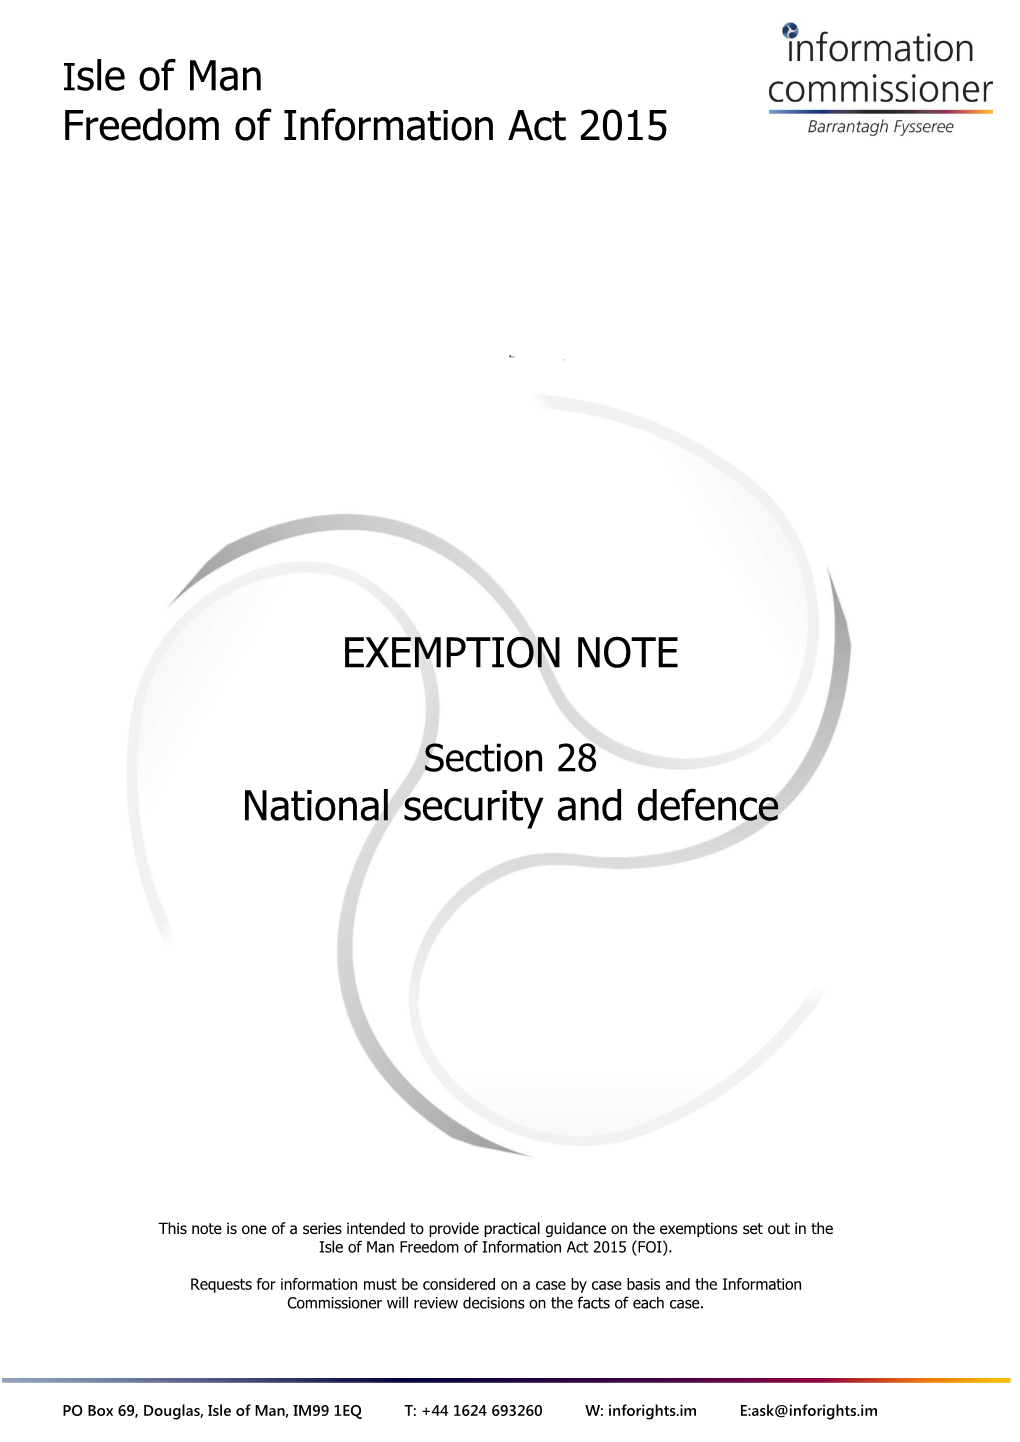 Section 28 National Security and Defence